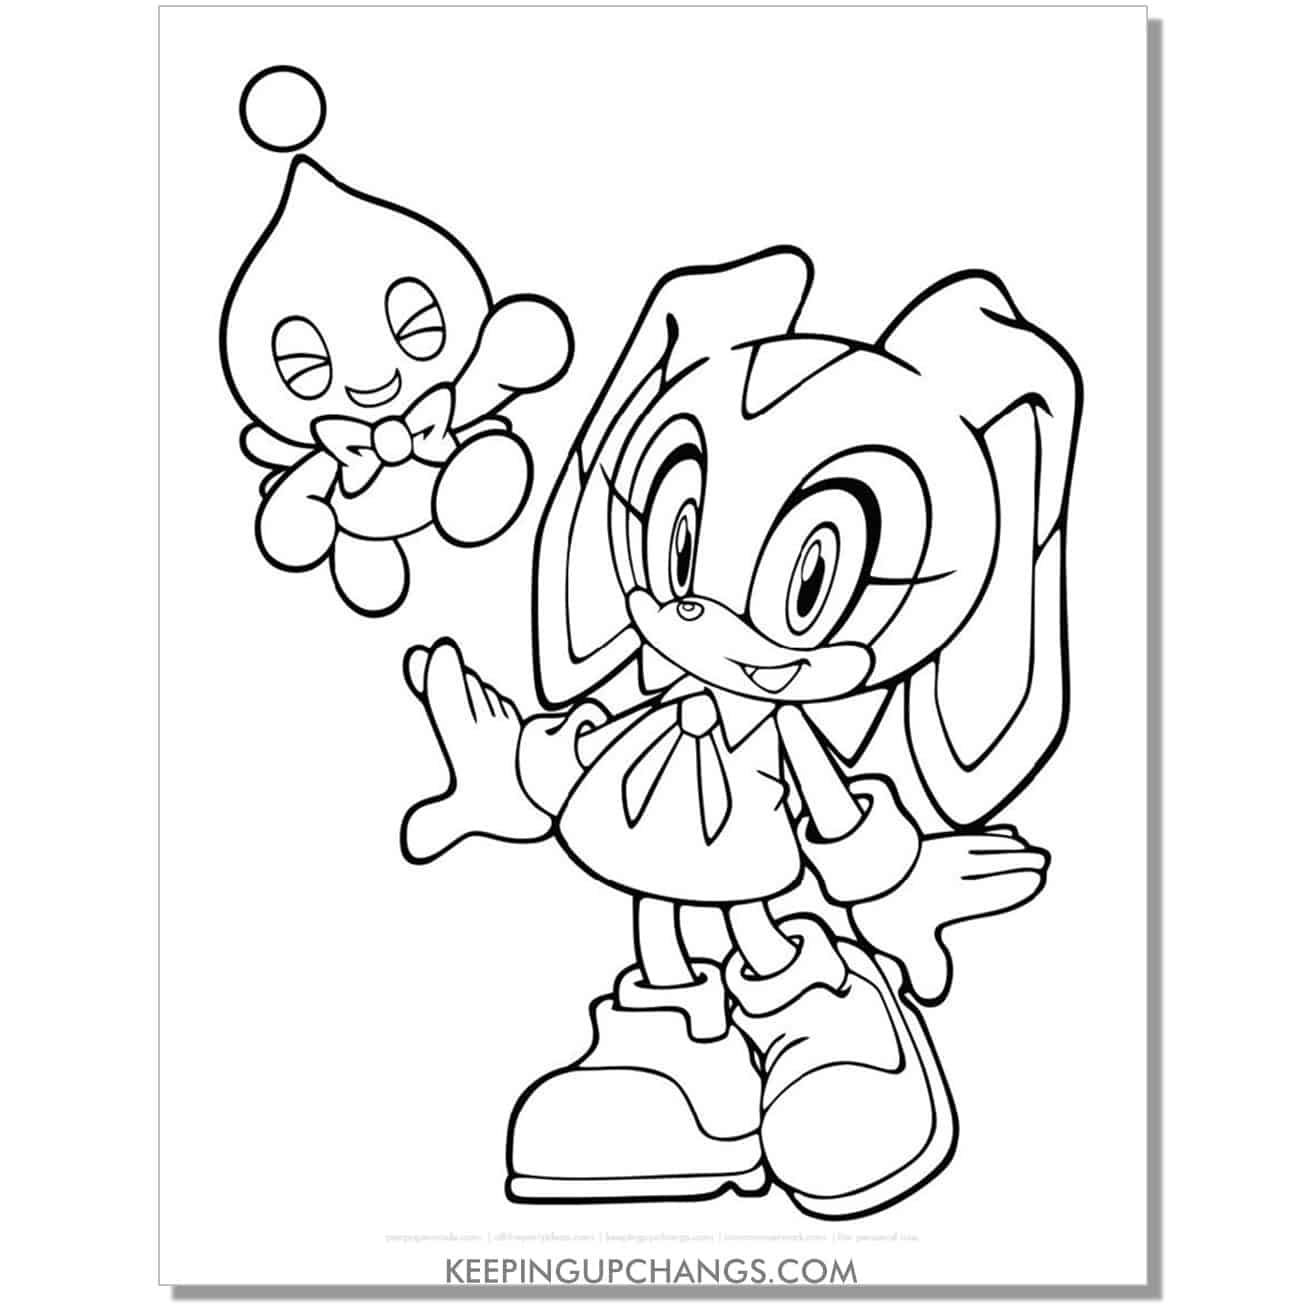 cream rabbit and cheese posing sonic coloring page.